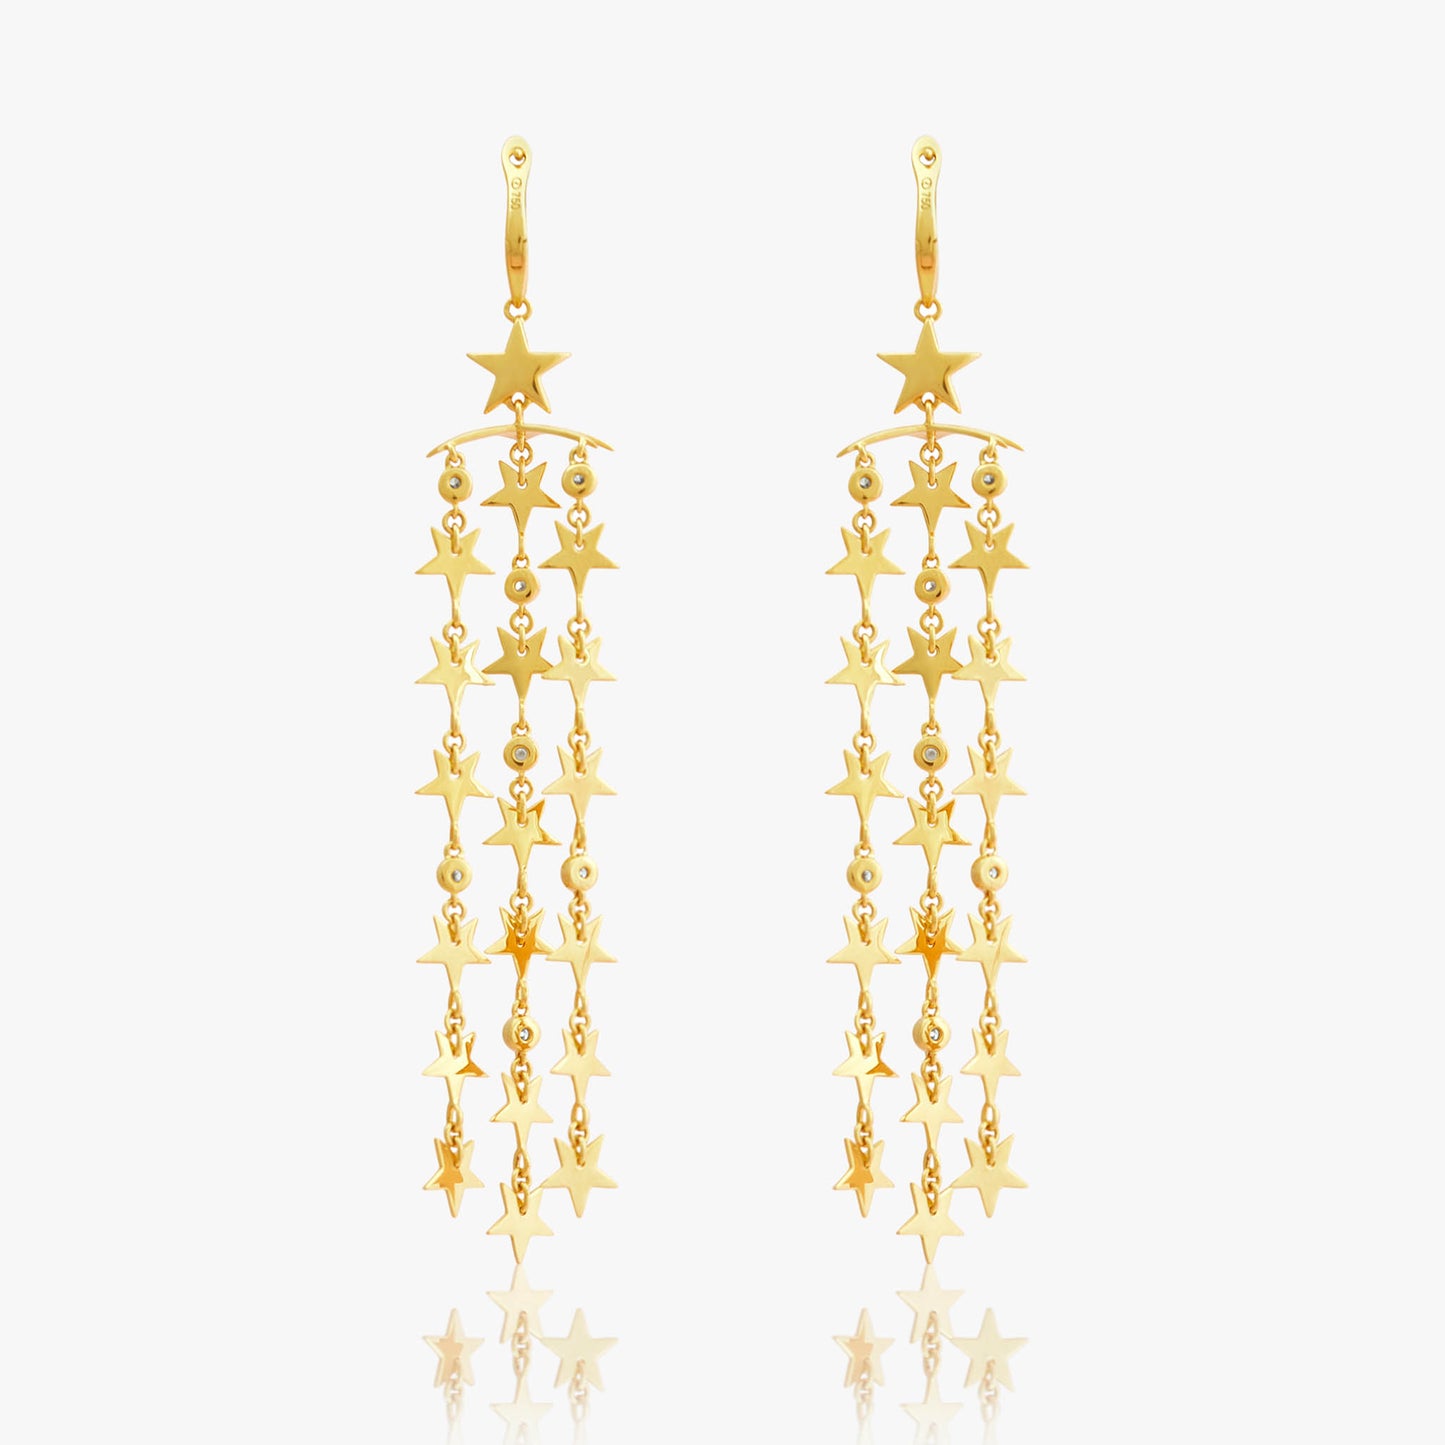 Guiding Star 18ct Yellow Gold Hanging Dazzling Earrings